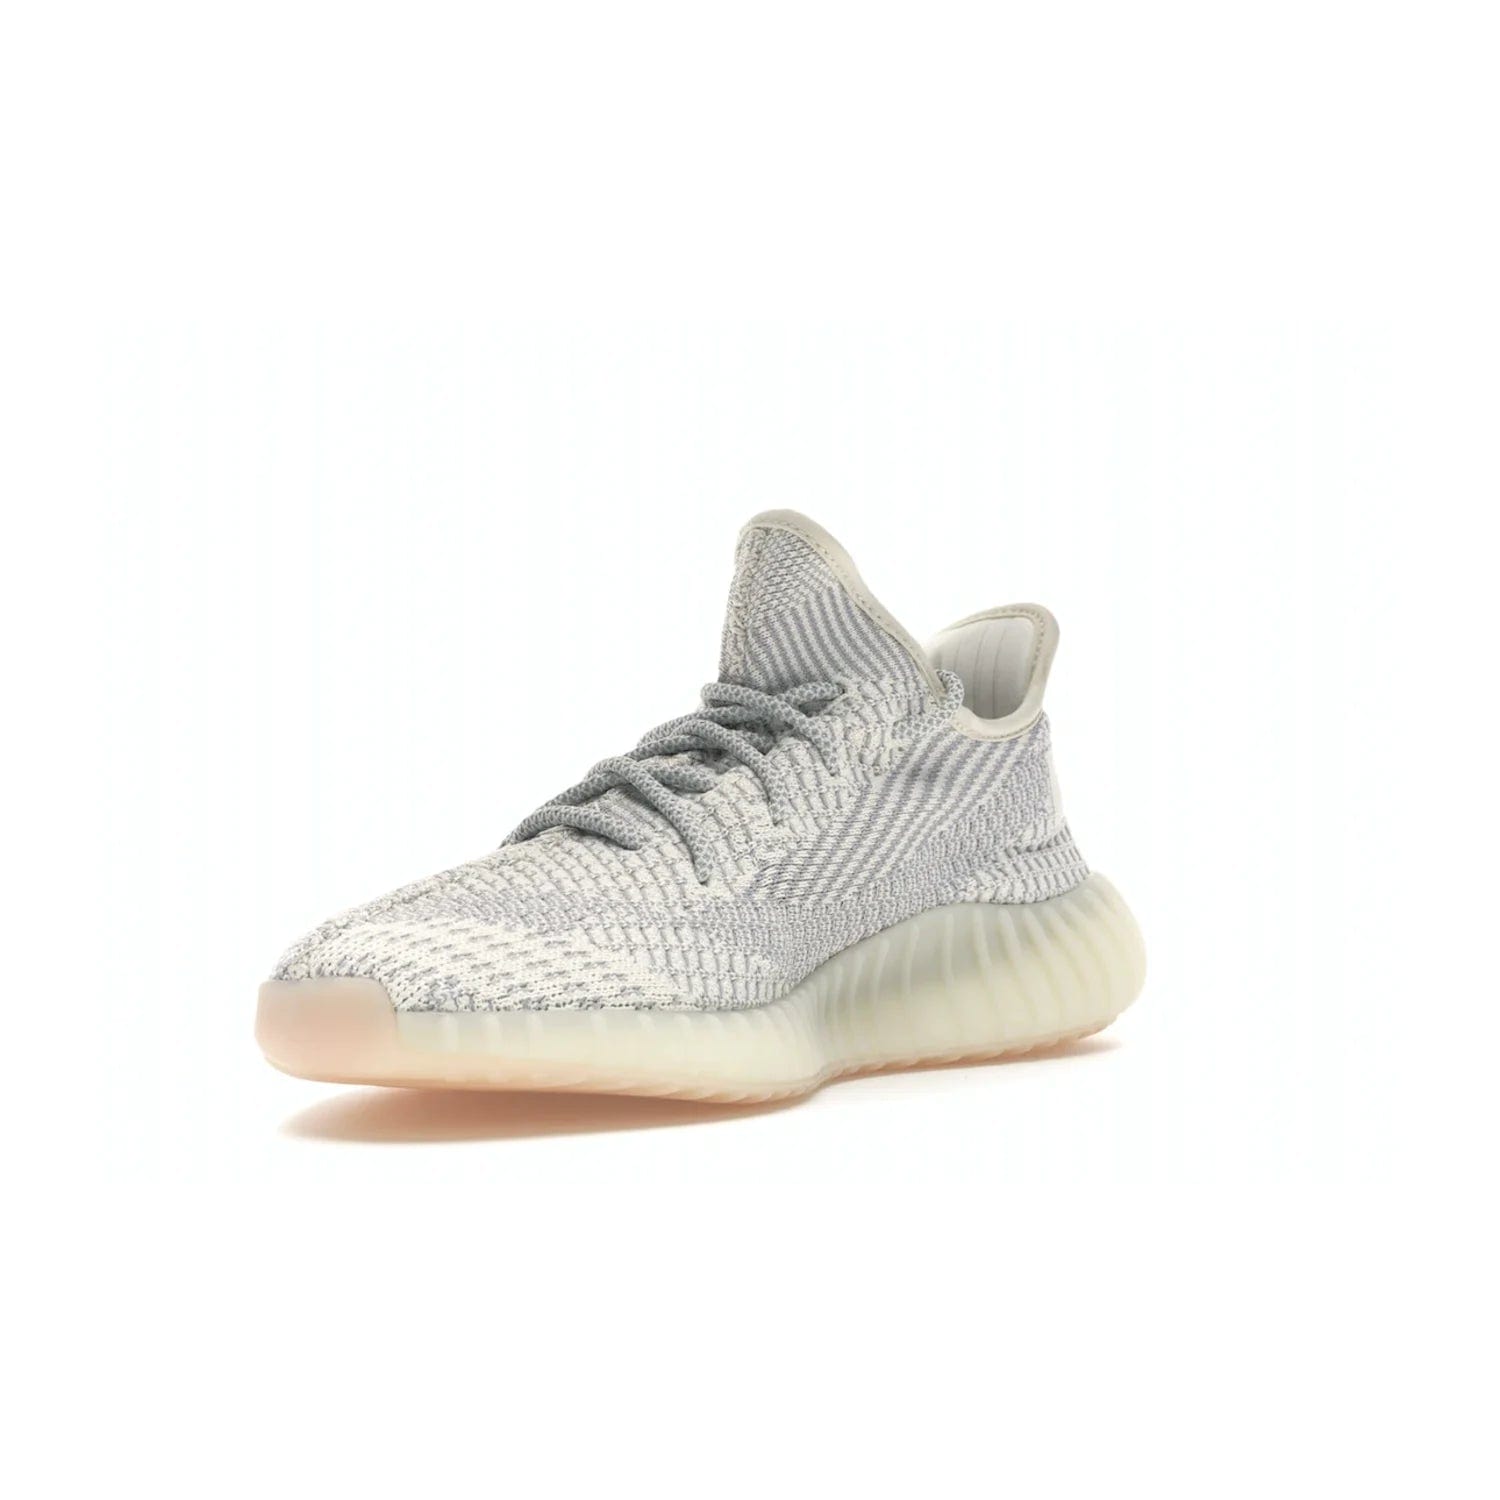 adidas Yeezy Boost 350 V2 Lundmark (Non Reflective) - Image 14 - Only at www.BallersClubKickz.com - Shop the exclusive adidas Yeezy Boost 350 V2 Lundmark with a subtle summer color, mesh upper, white-to-cream transitional midsole, light tan outsole, and pink middle stripe. Comfort and style come together in this perfect summer 350 V2. Released on July 11, 2019.